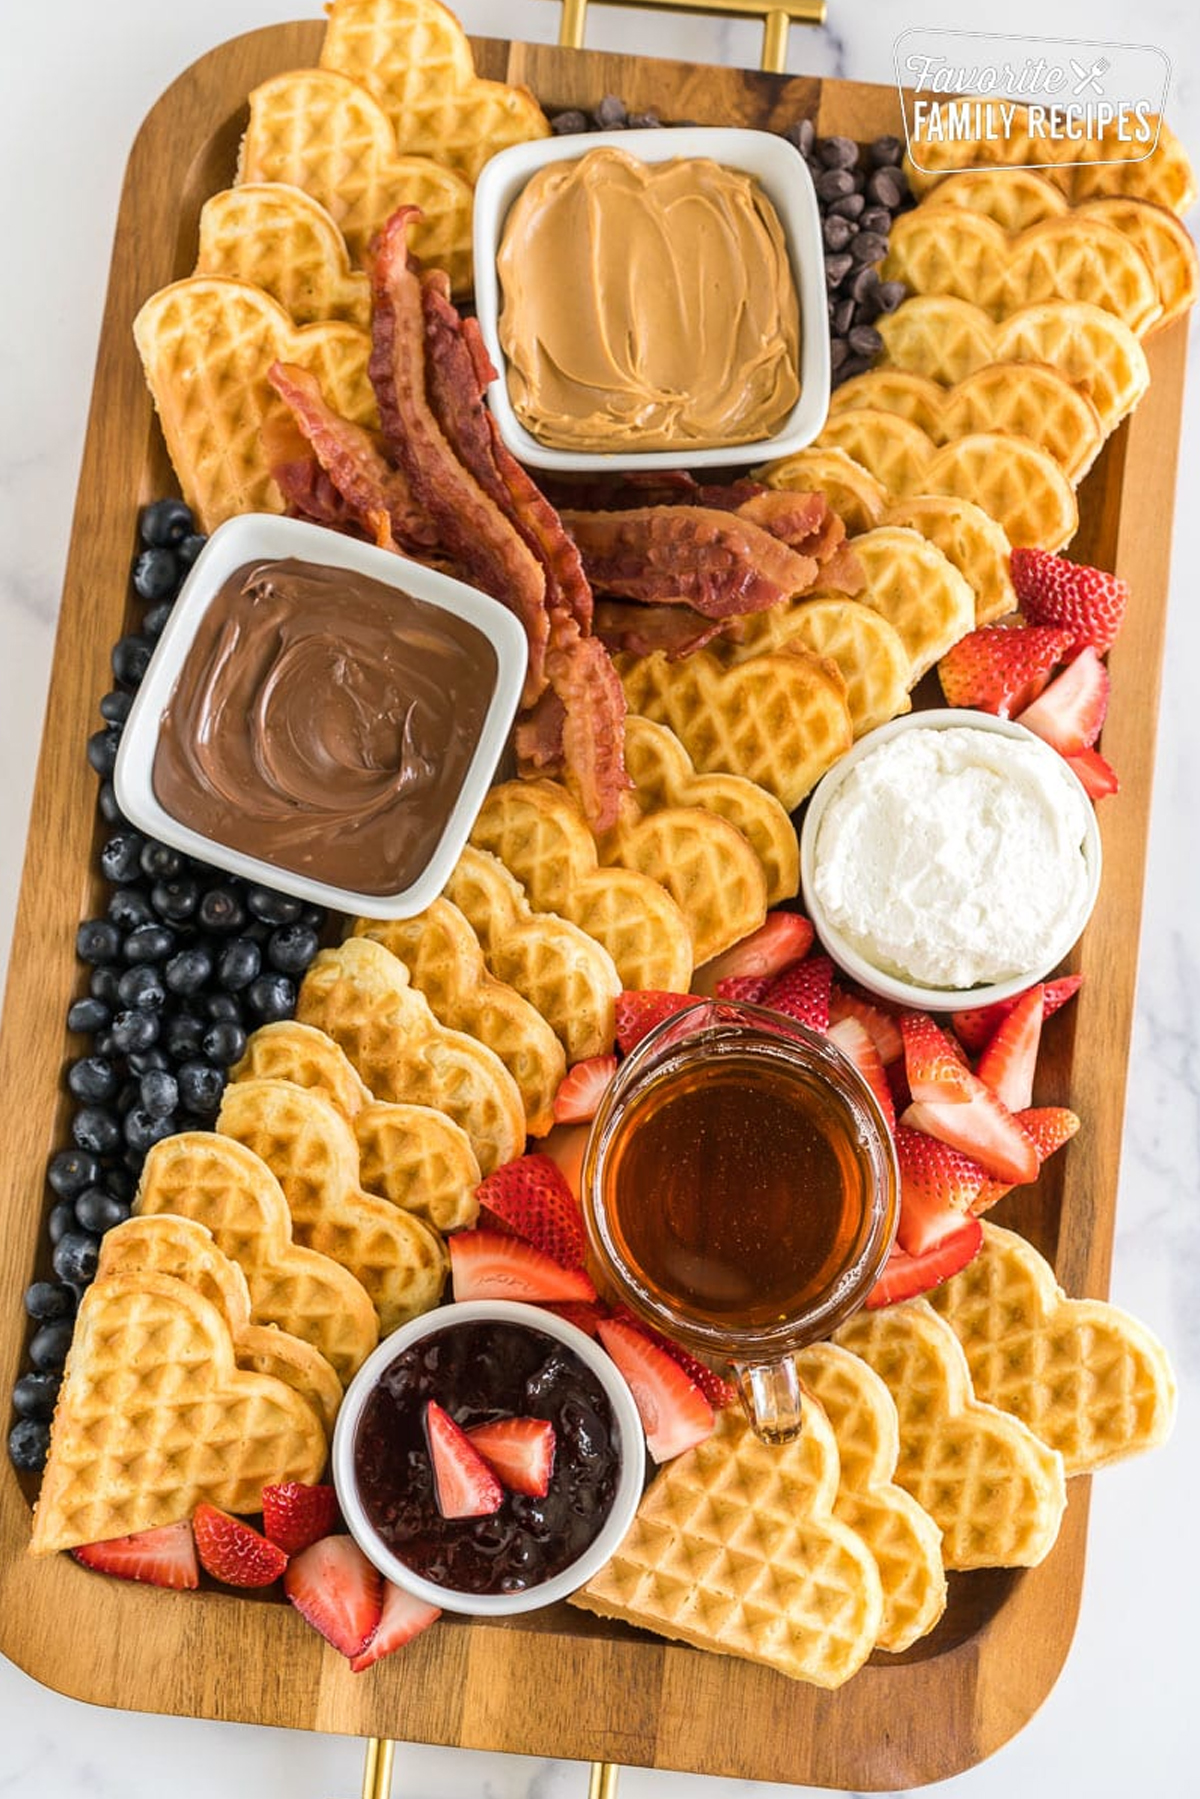 favorite family recipes includes heart shaped waffles and plenty of delicious toppings.